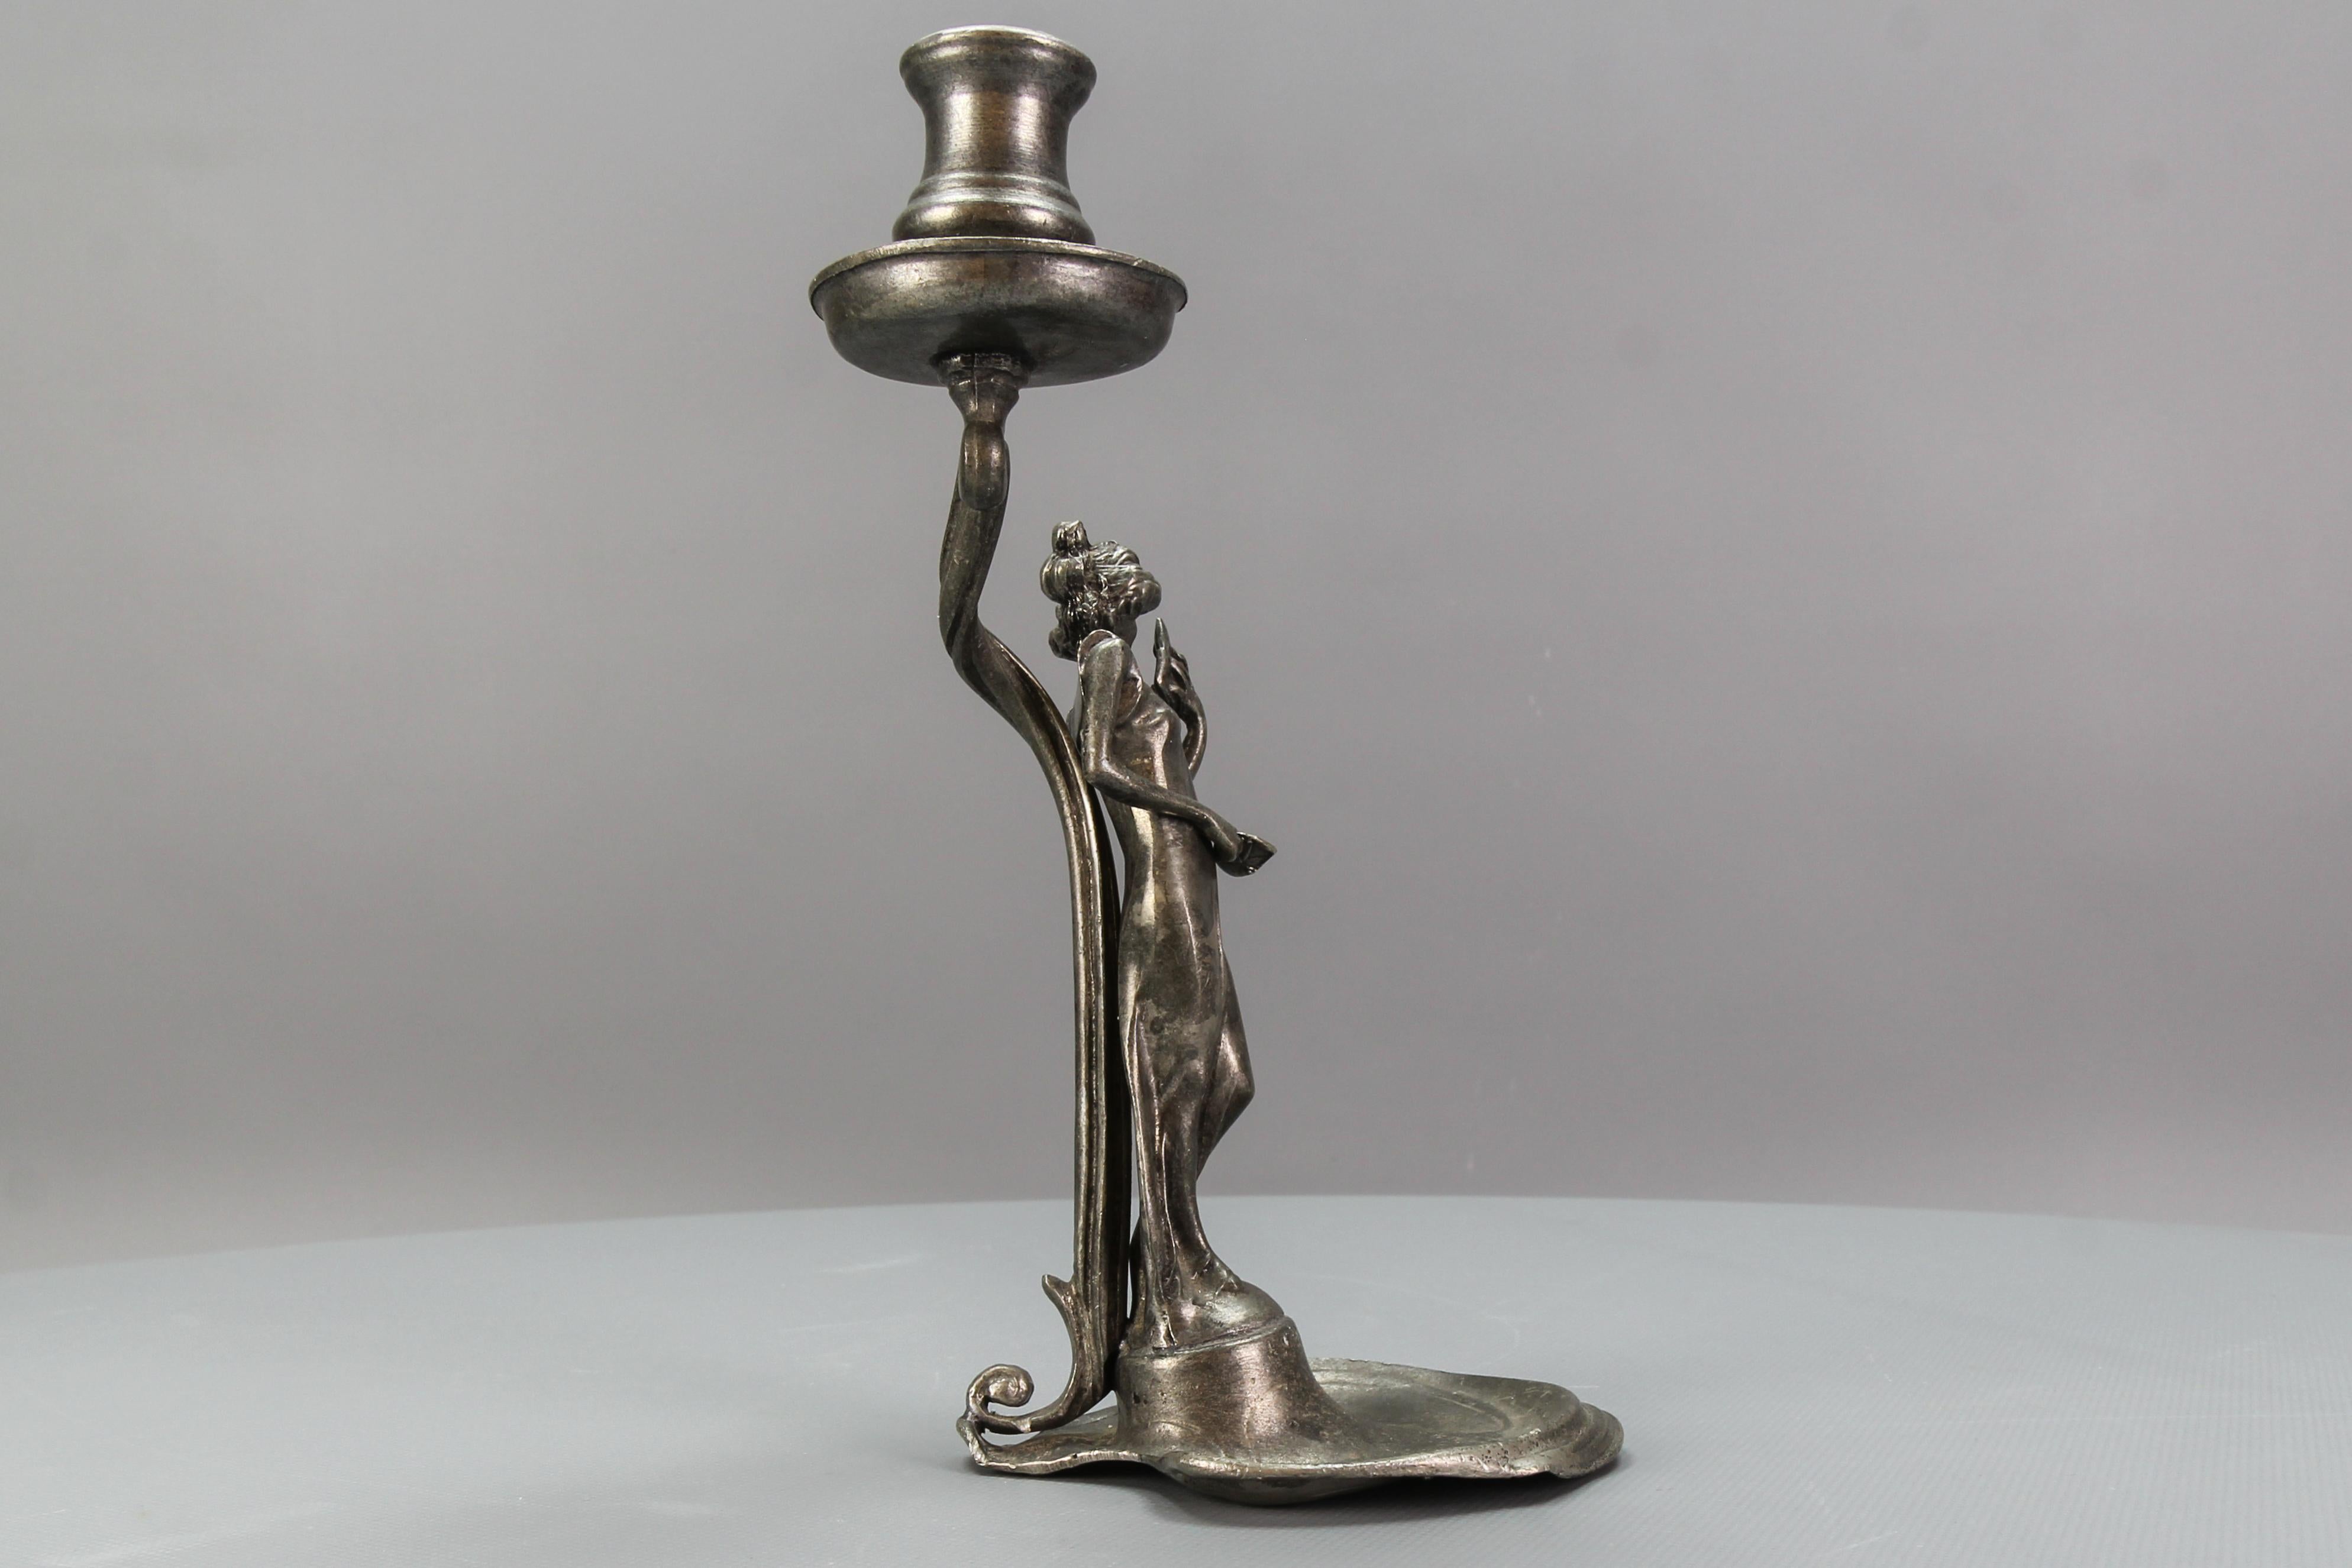 French Art Nouveau Pewter Candlestick with a Lady Sculpture, ca. 1920 For Sale 5